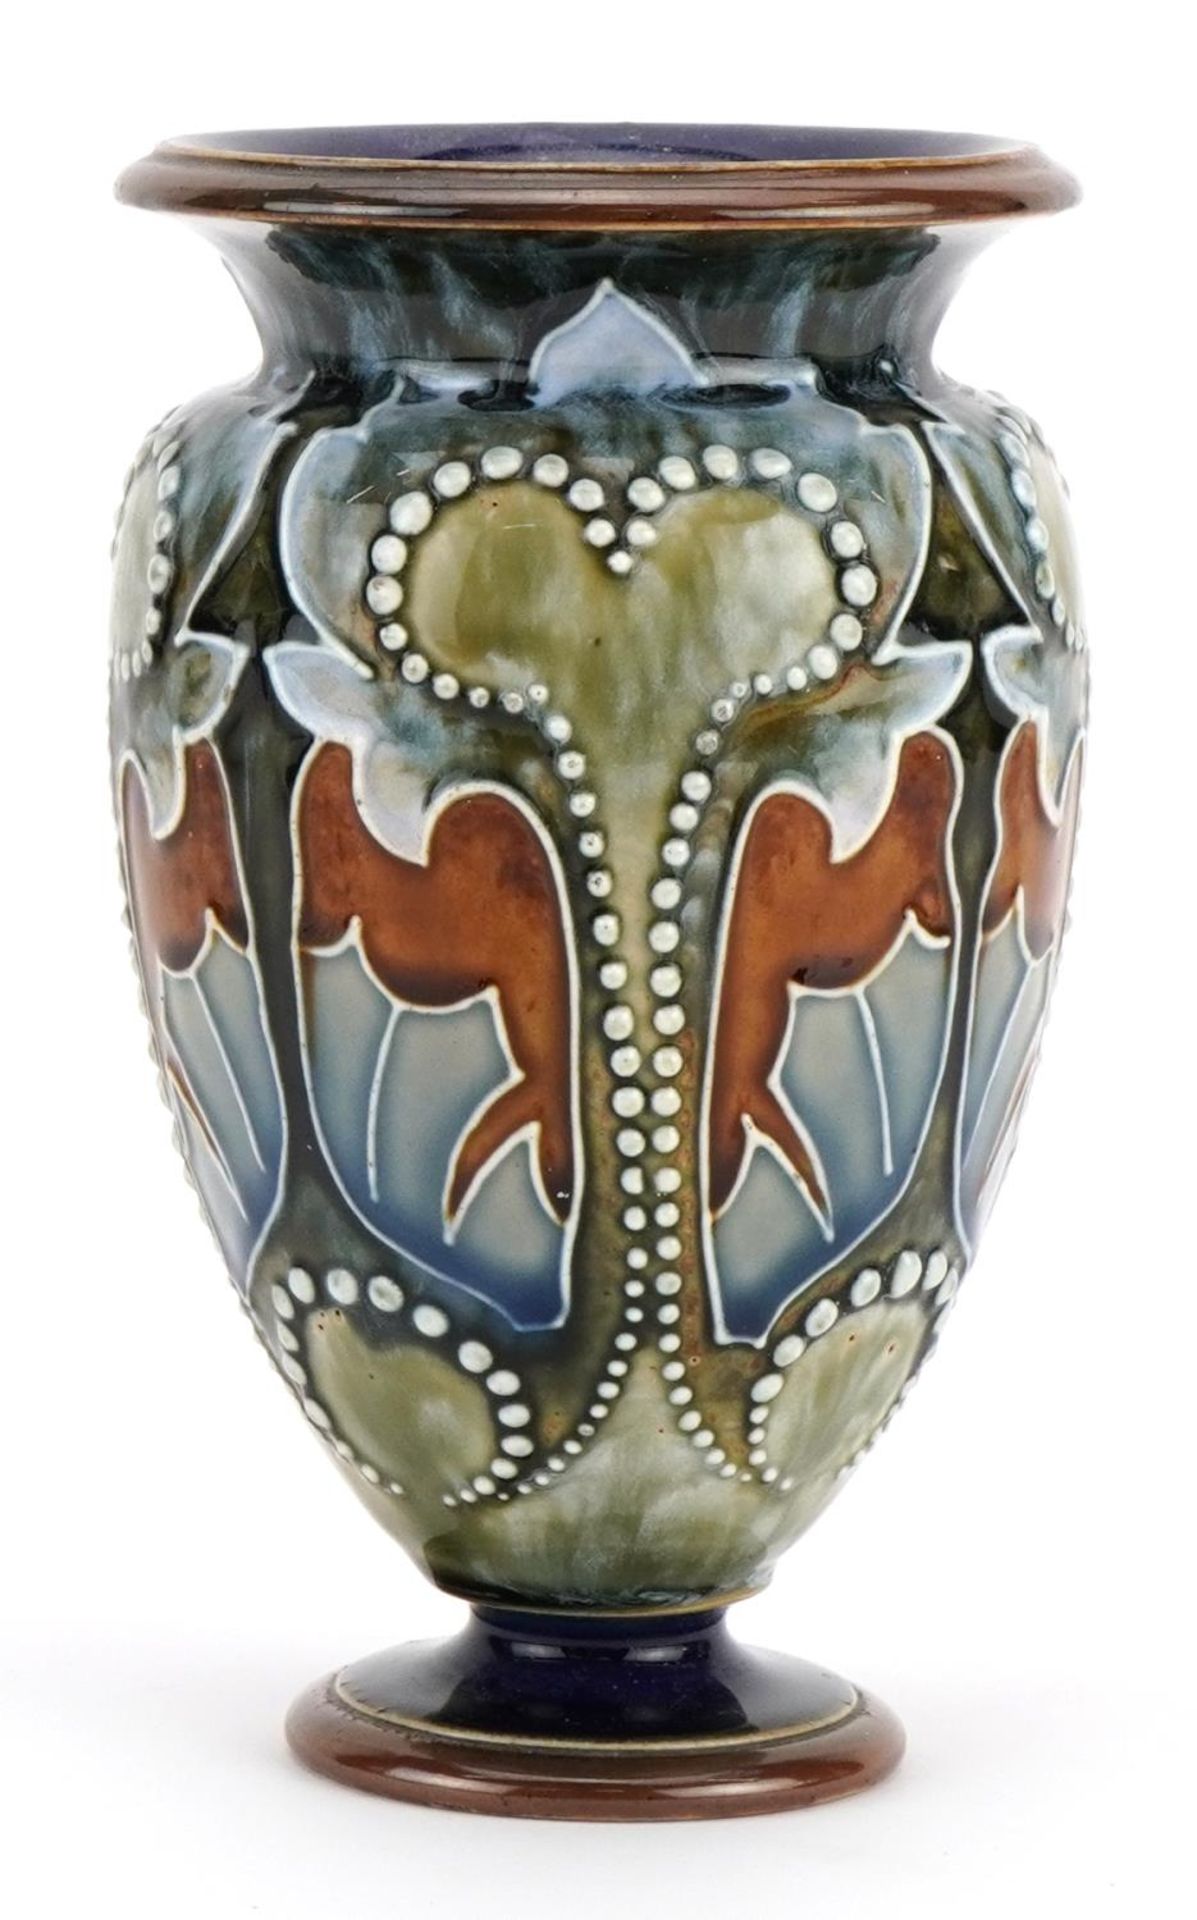 Frank Barlow for Royal Doulton, Art Nouveau stoneware vase hand painted with flowers, 16.5cm high